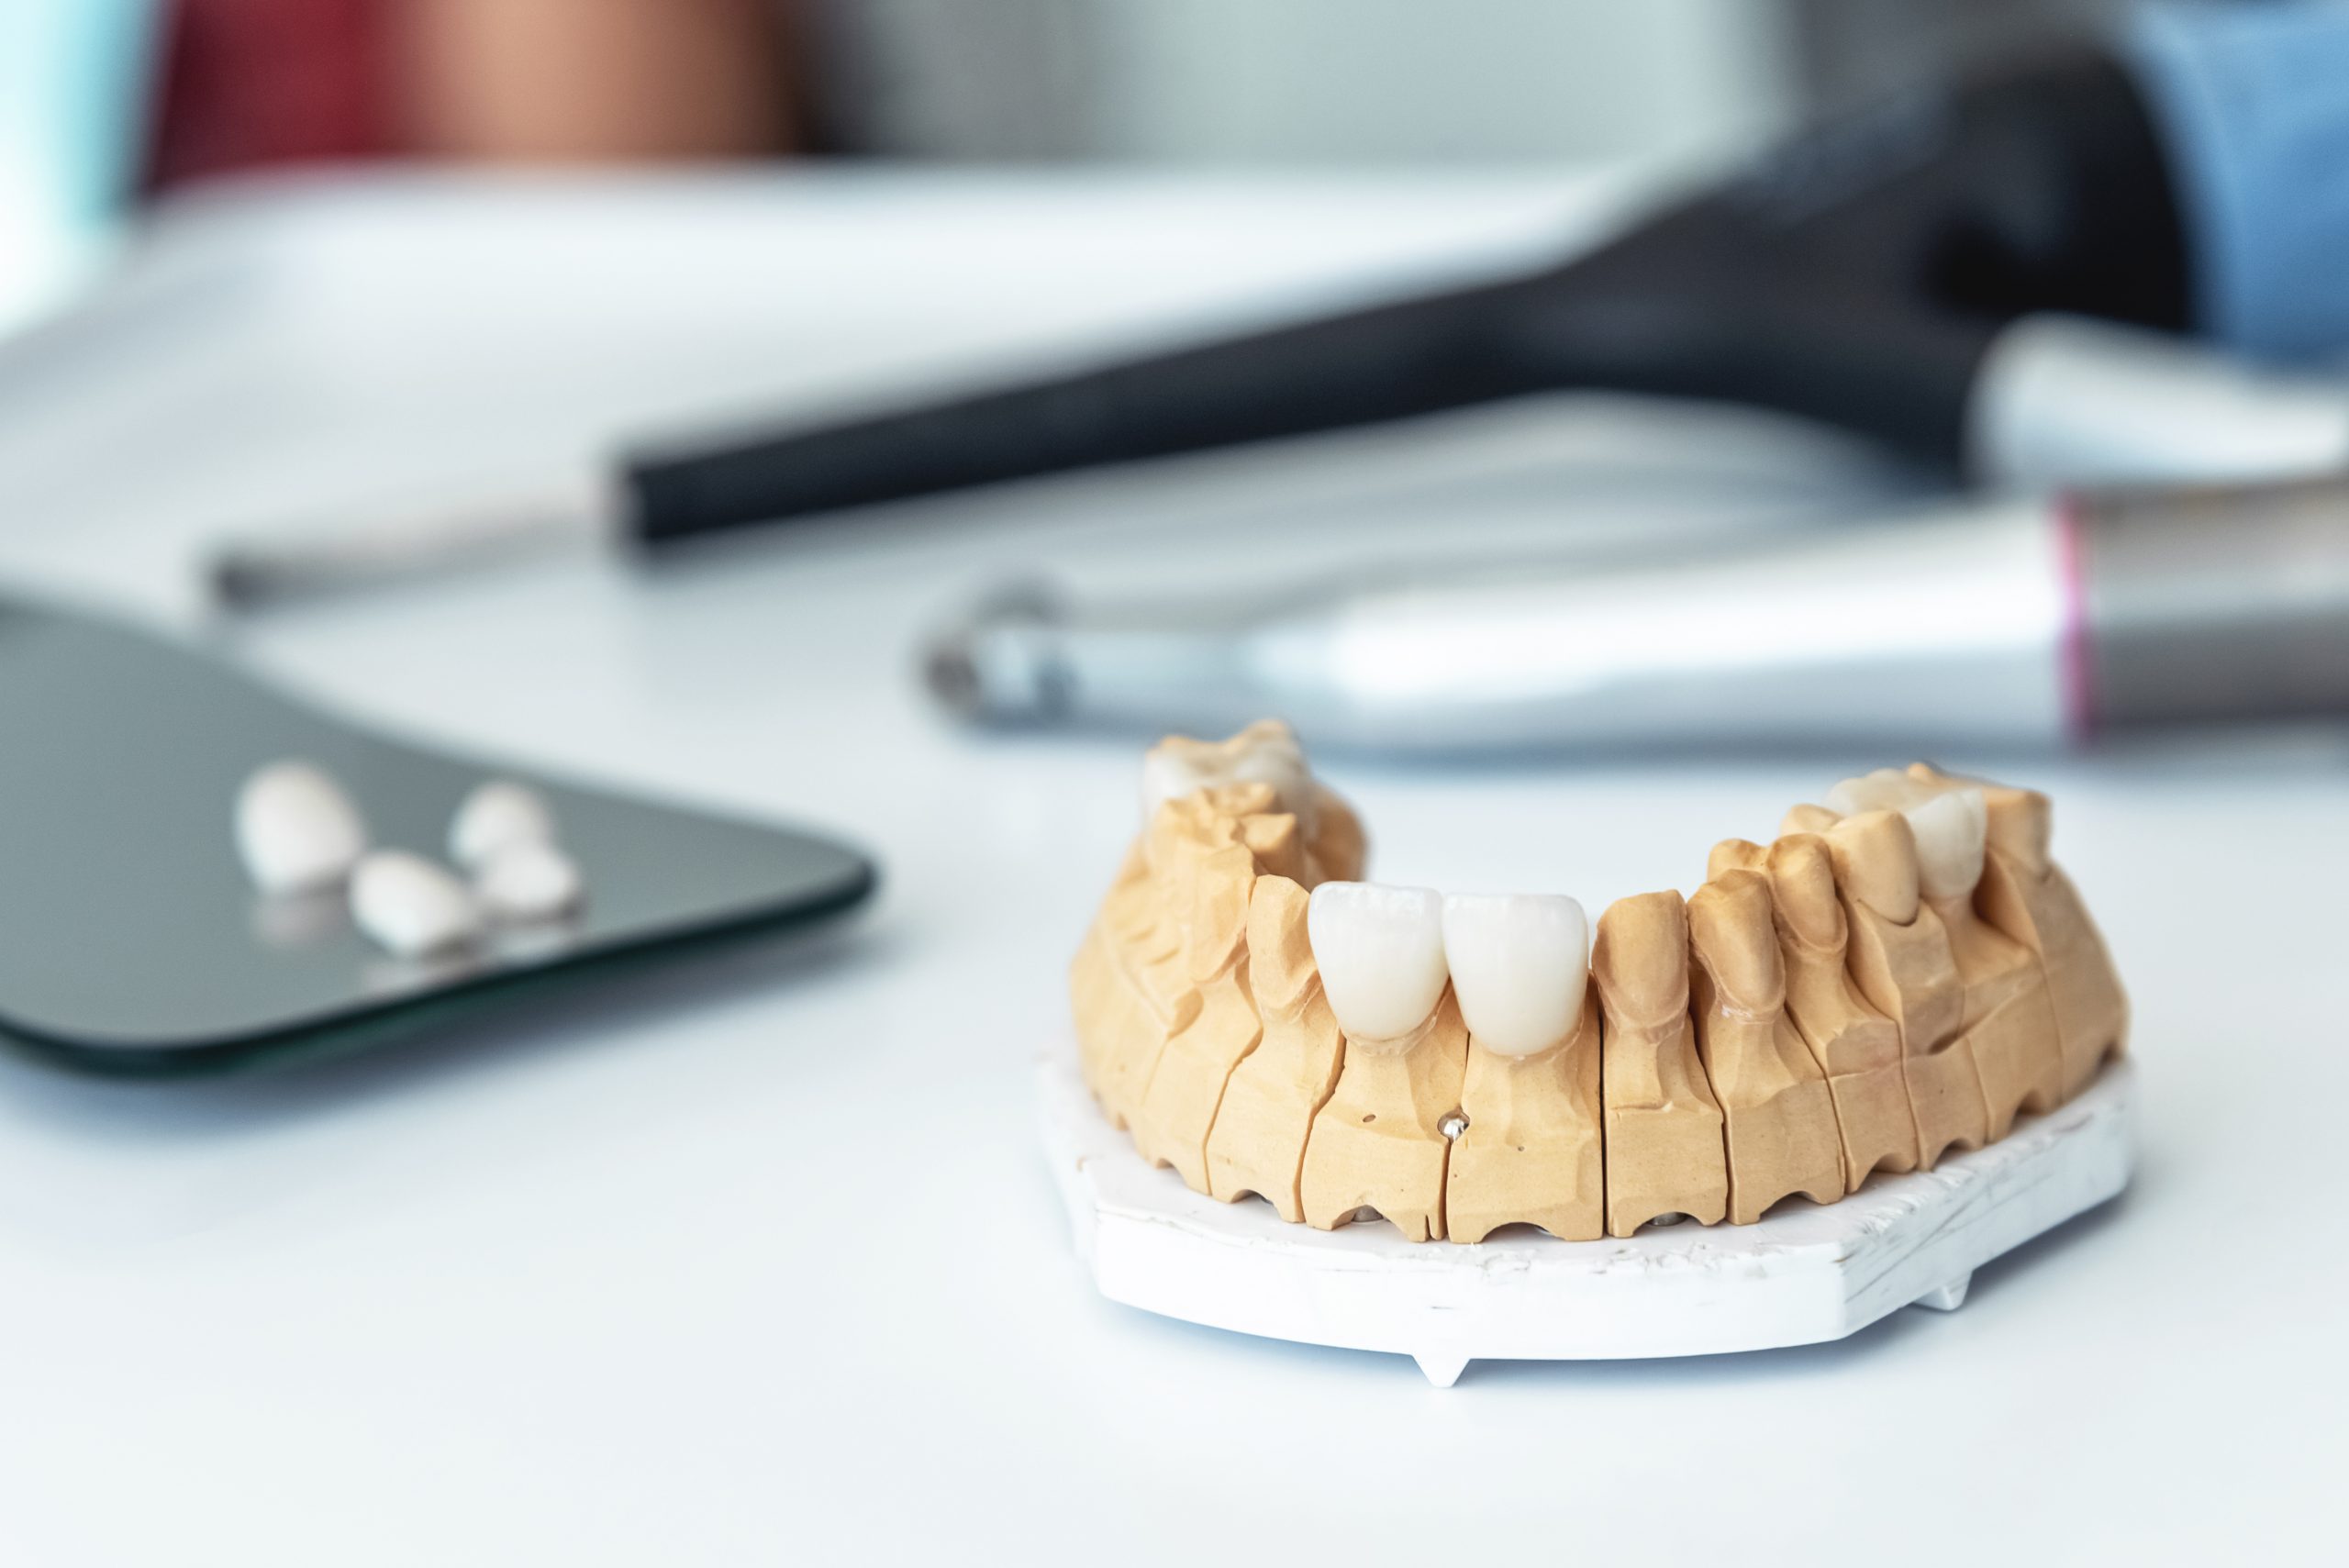 manufacture of veneers, dental implants and crowns in the dental laboratory. Maxillary denture with veneers in the dental office.